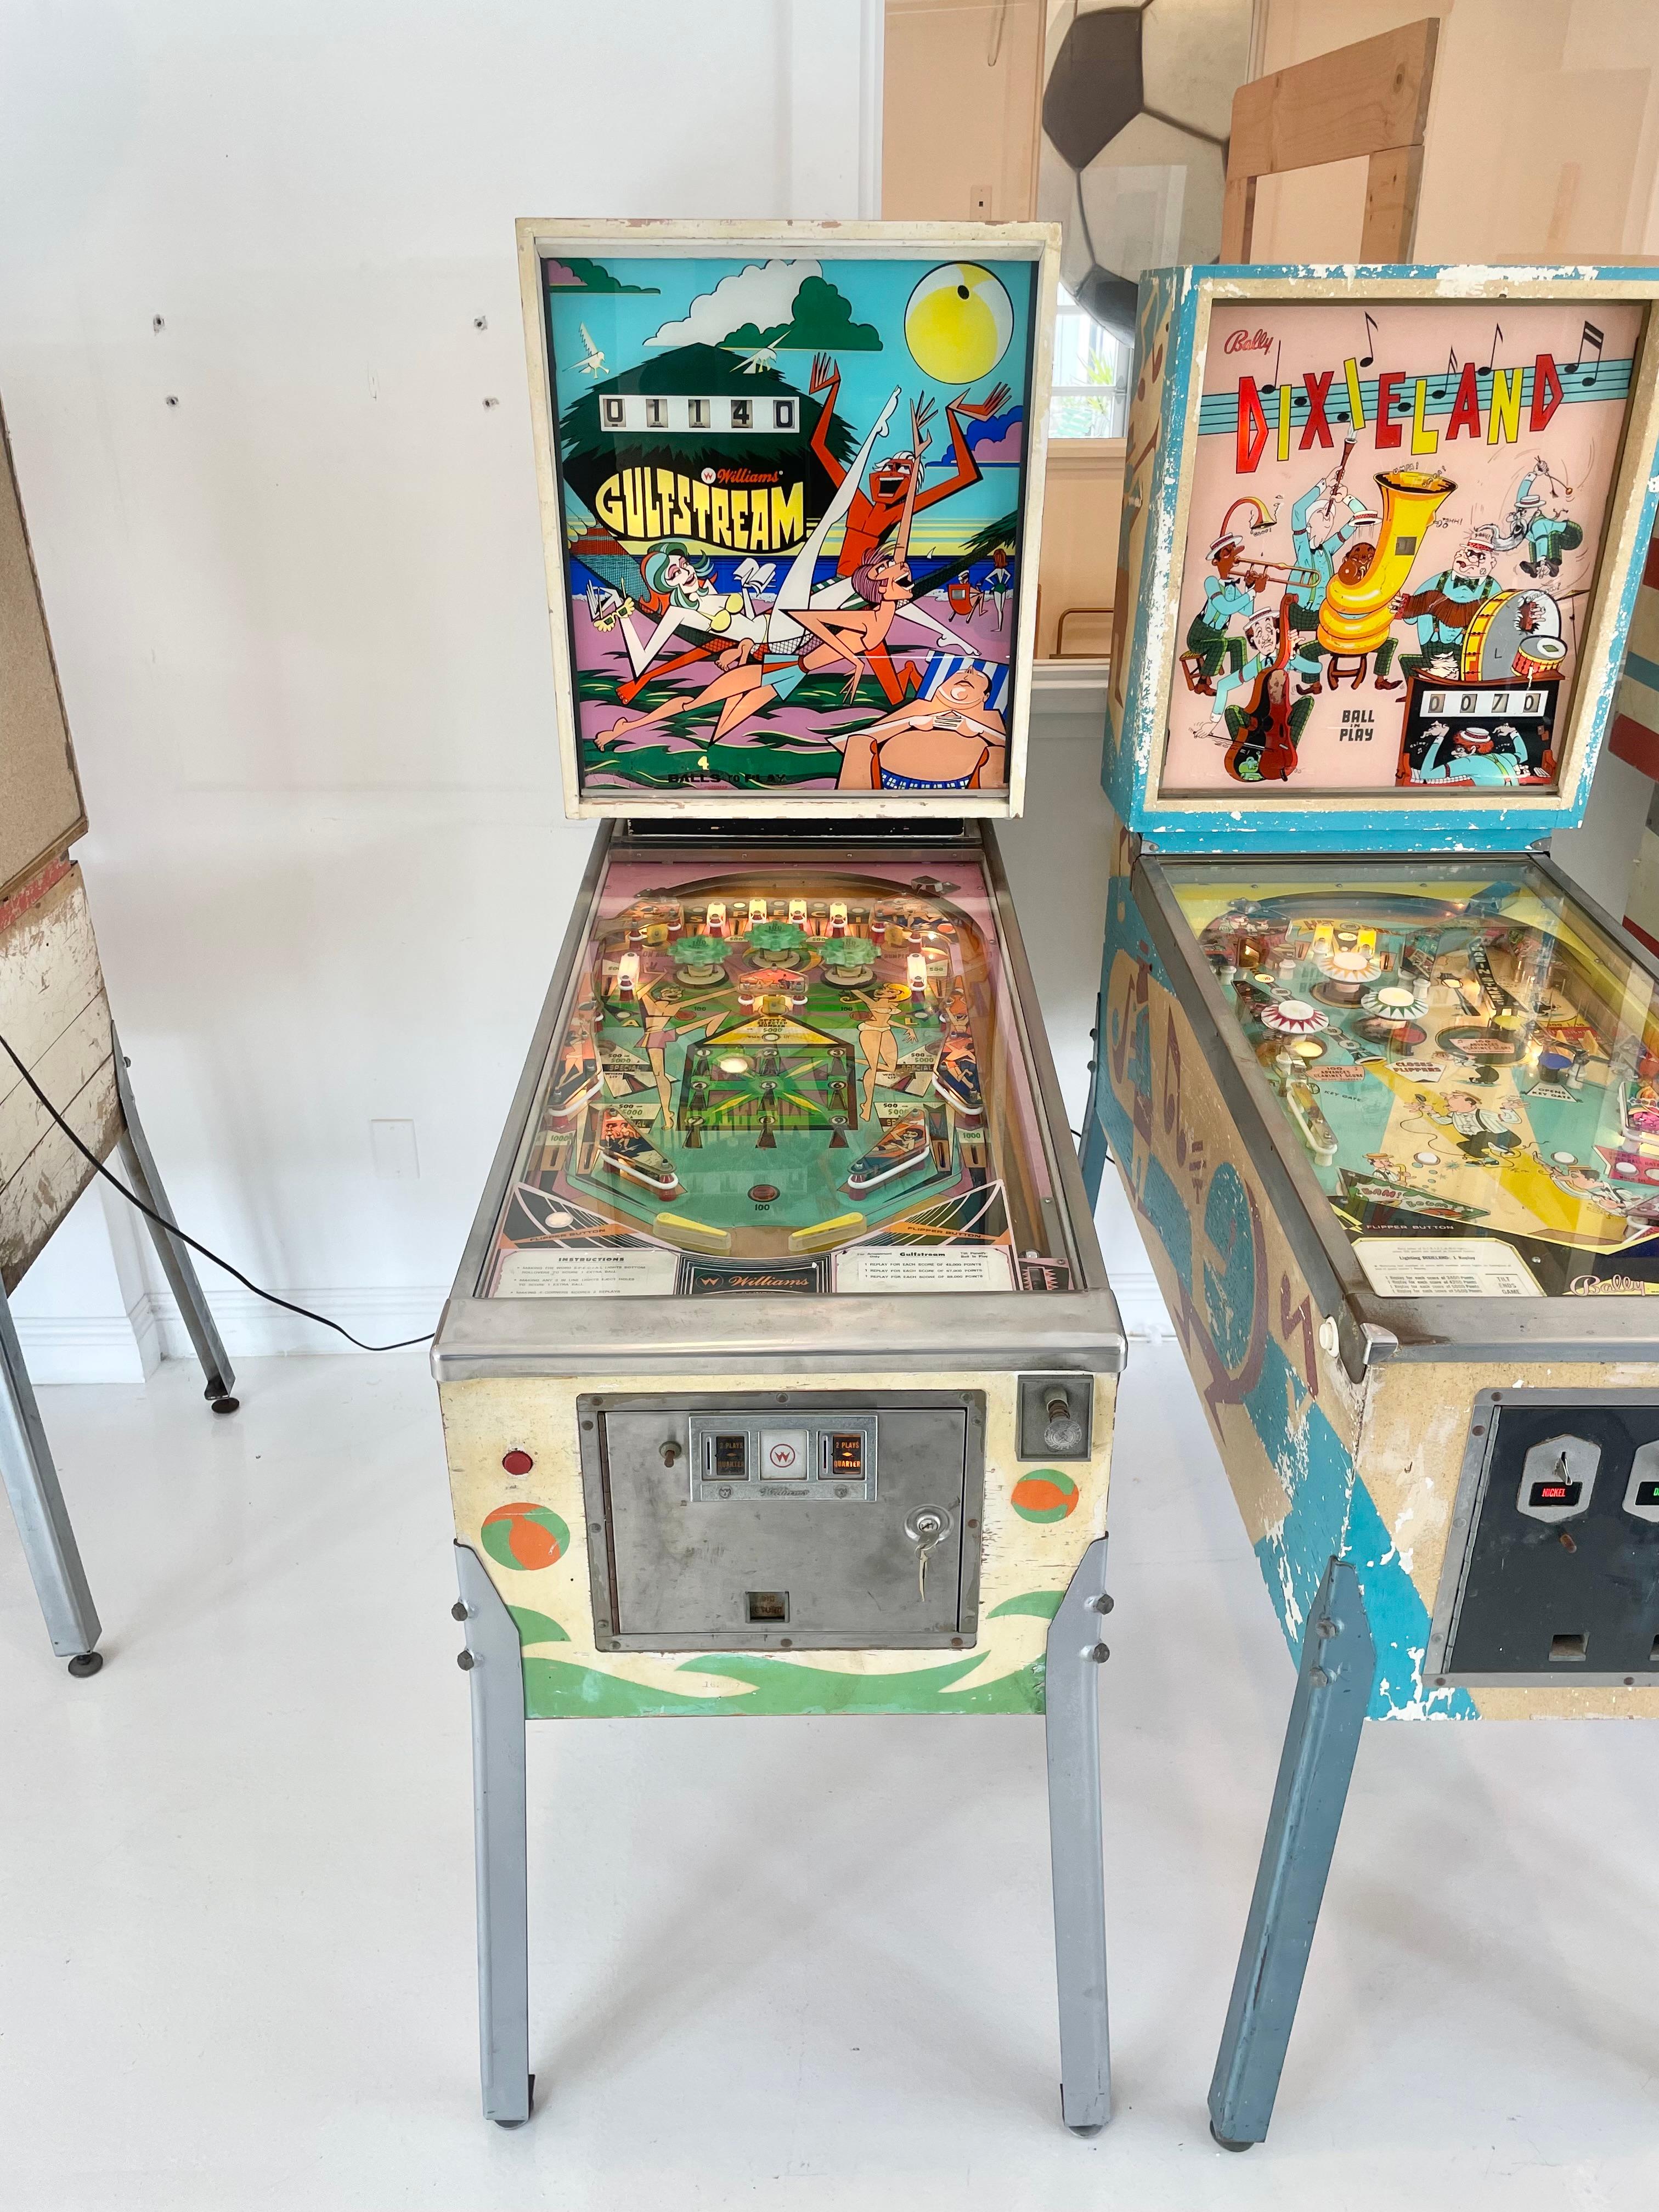 Vintage 'Gulfstream' pinball machine from 1972. Designed by Norm Clark and manufactured by Williams Electronics. 4175 produced in total. In excellent working condition. Great visuals and sounds. Extremely fun paced gameplay. 

This game features